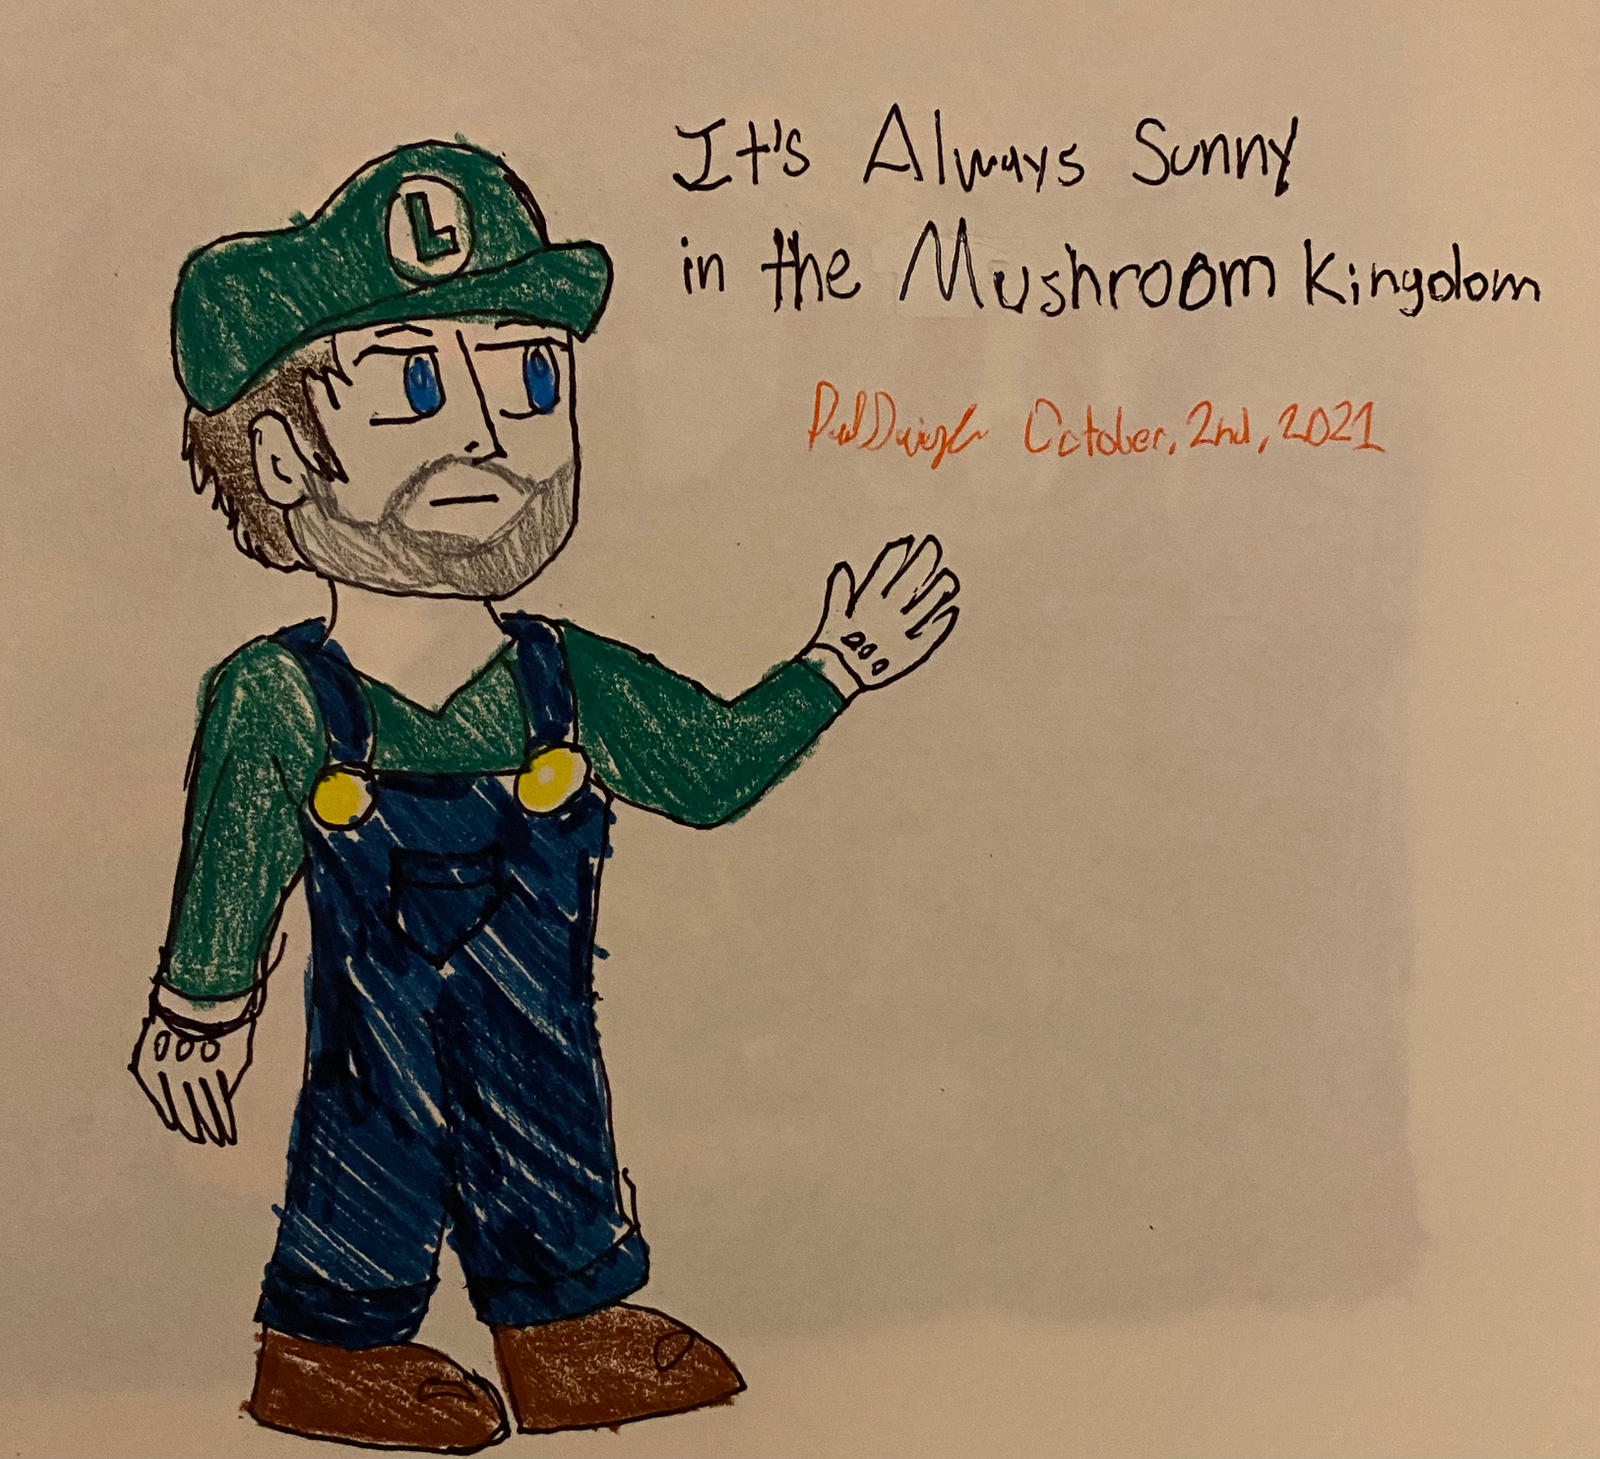 Charlie Day talks about the similarities between him and Luigi